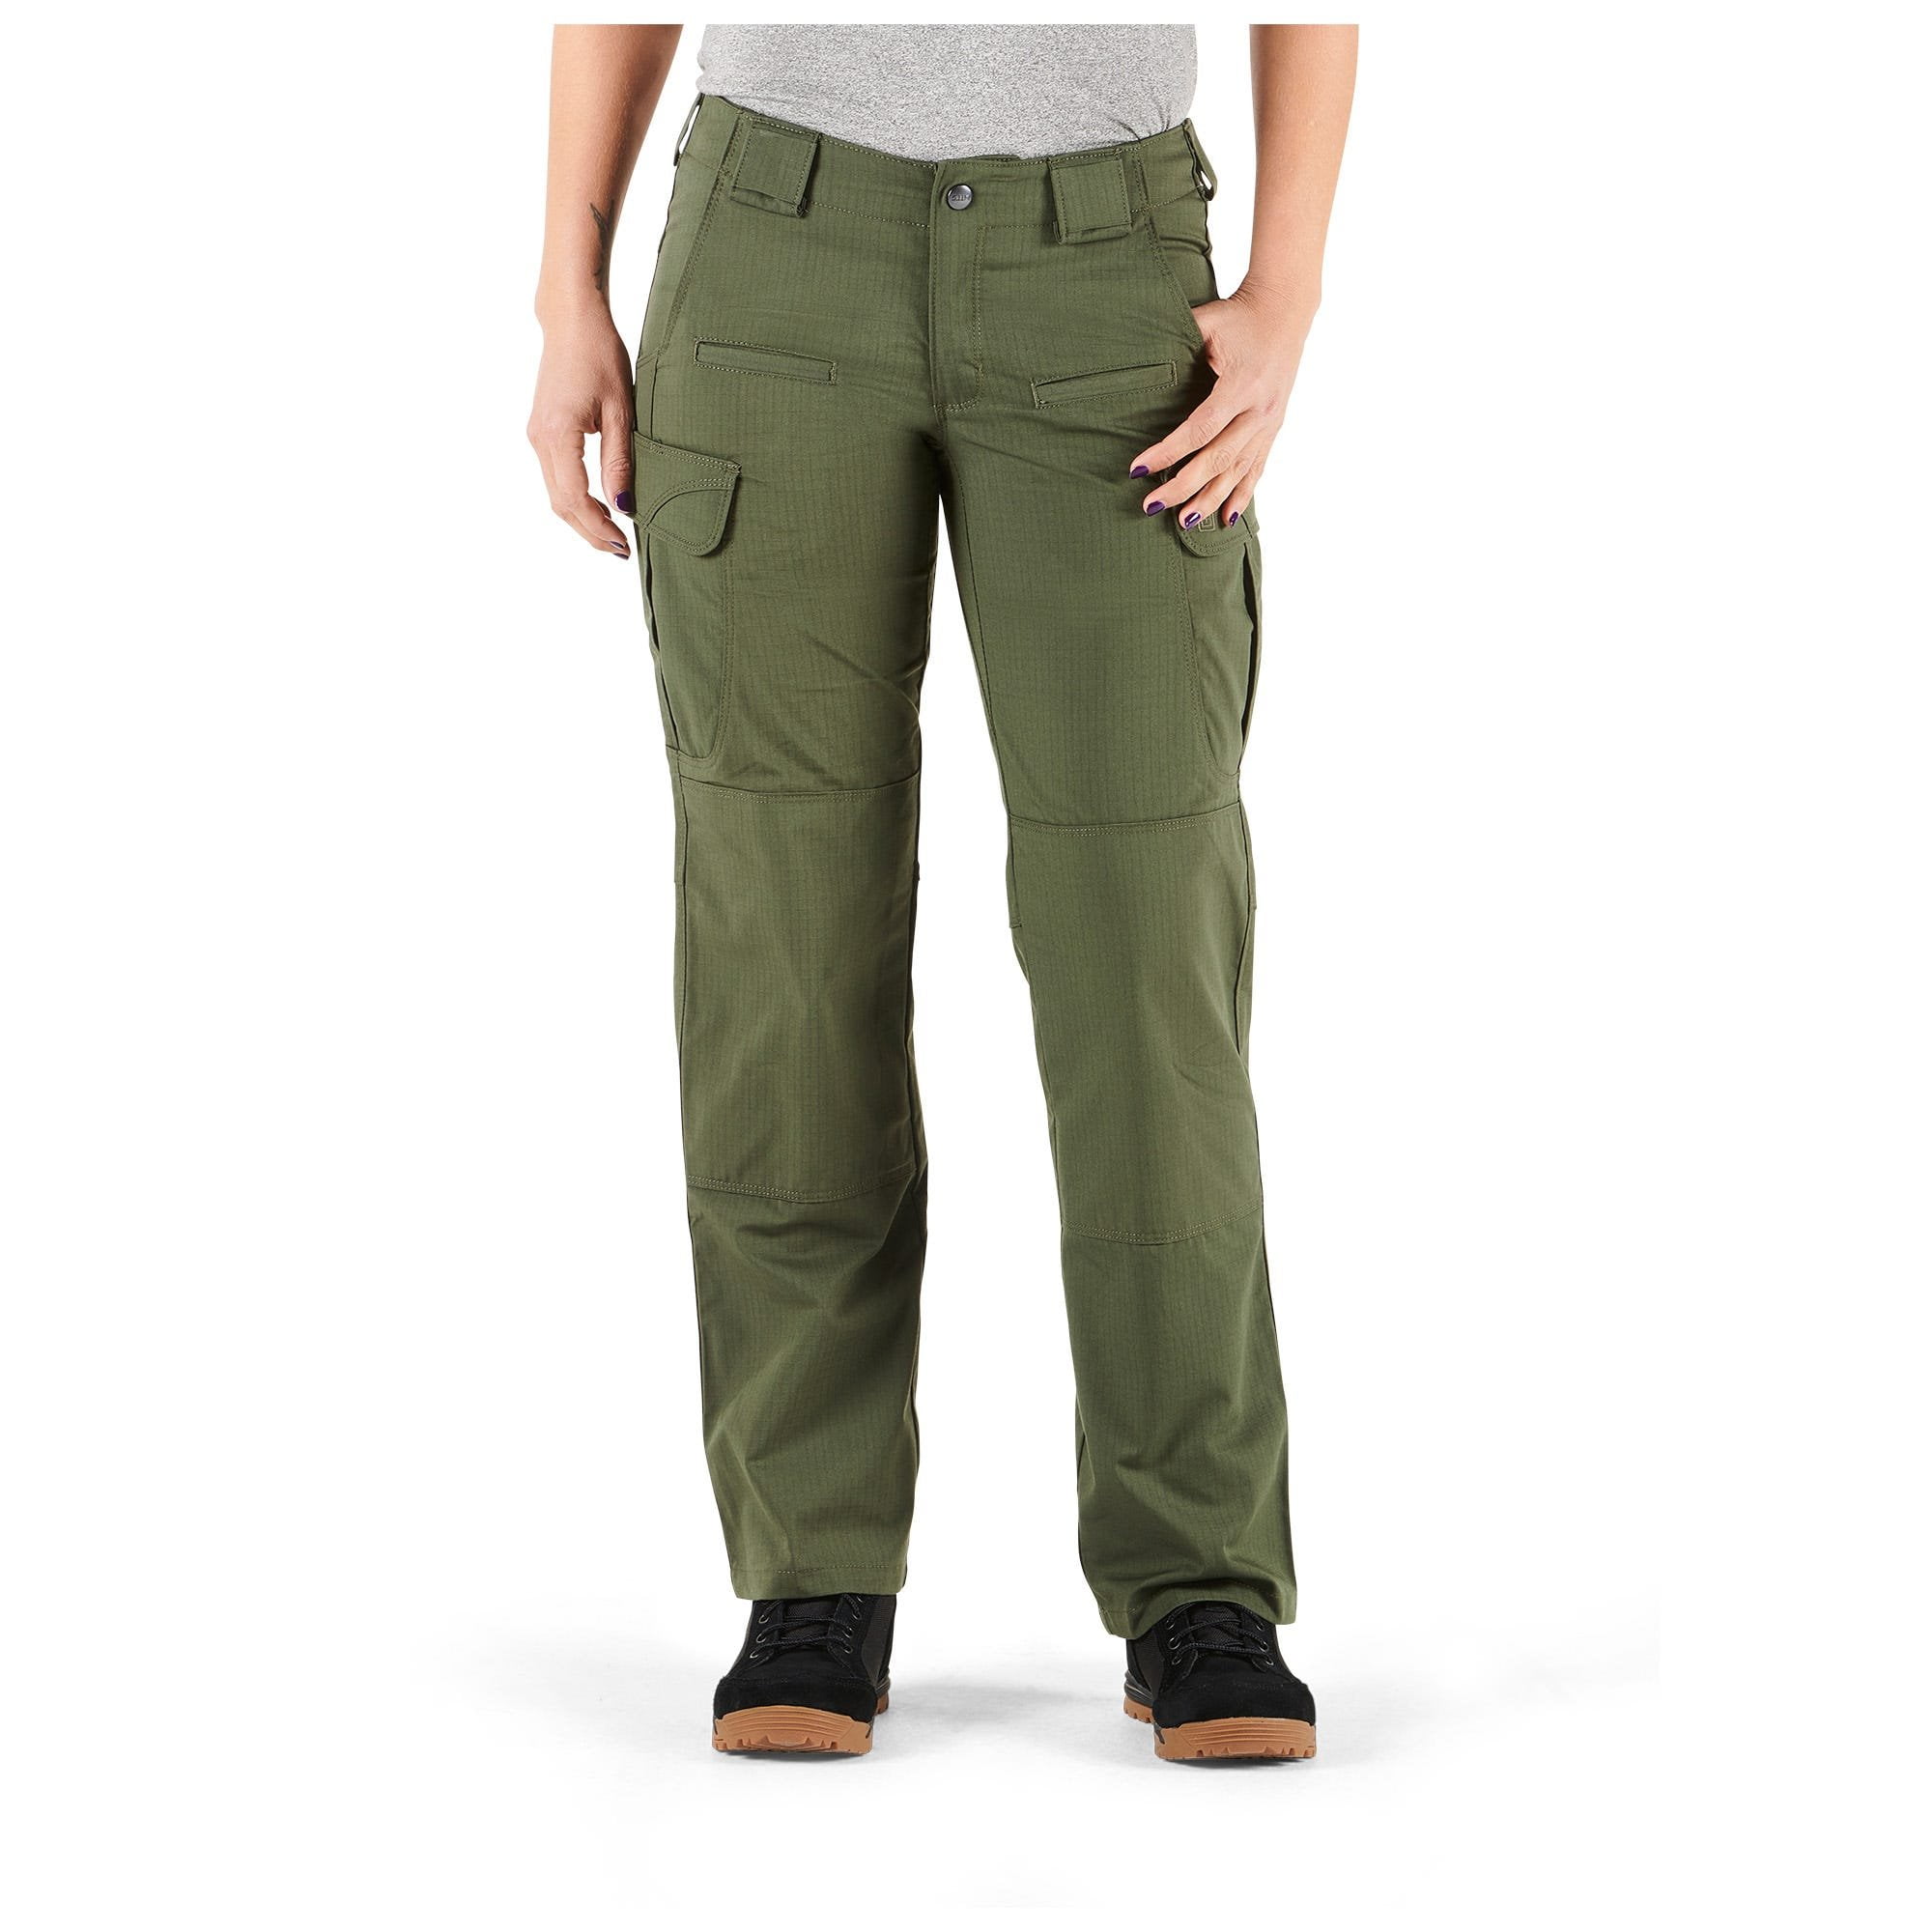 5.11 Tactical Women's Stryke Covert Cargo Pants, Stretchable, Gusseted  Construction, TDU Green, 12/Regular, Style 64386 - Walmart.com